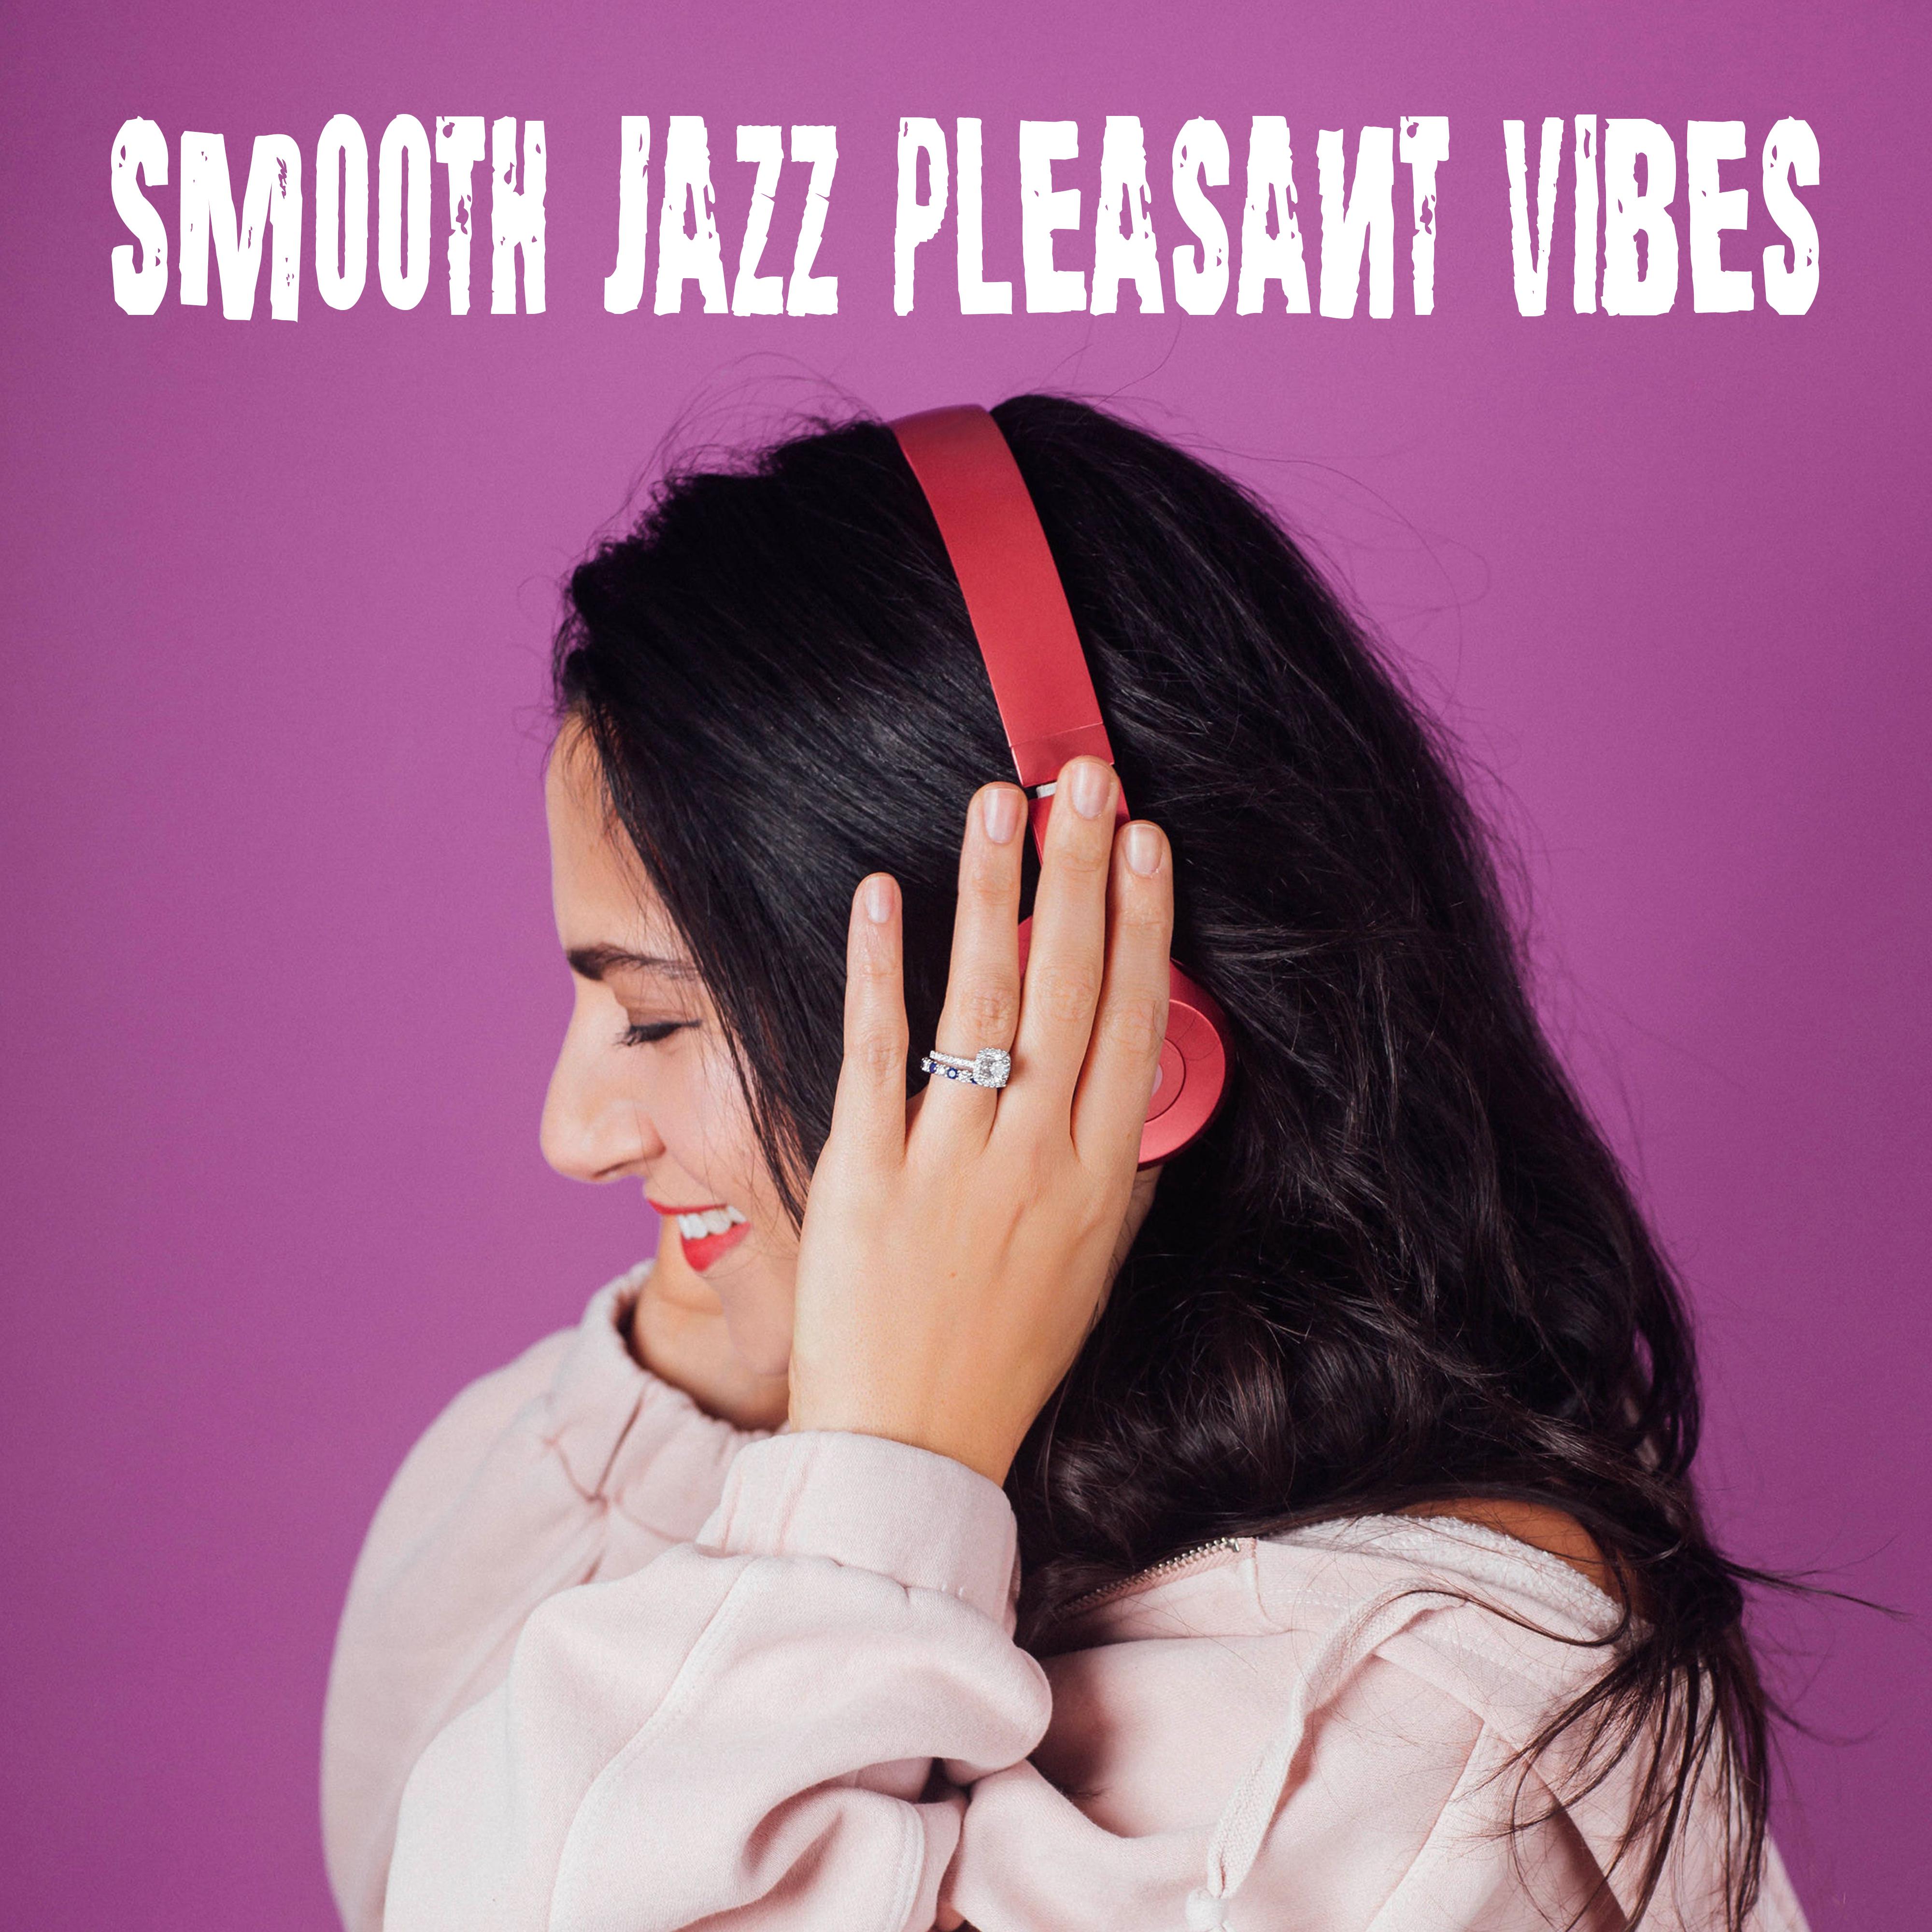 Smooth Jazz Pleasant Vibes: 2019 Instrumental Jazz Music Collection, Vintage Melodies with Sounds of Piano, Guitar & More